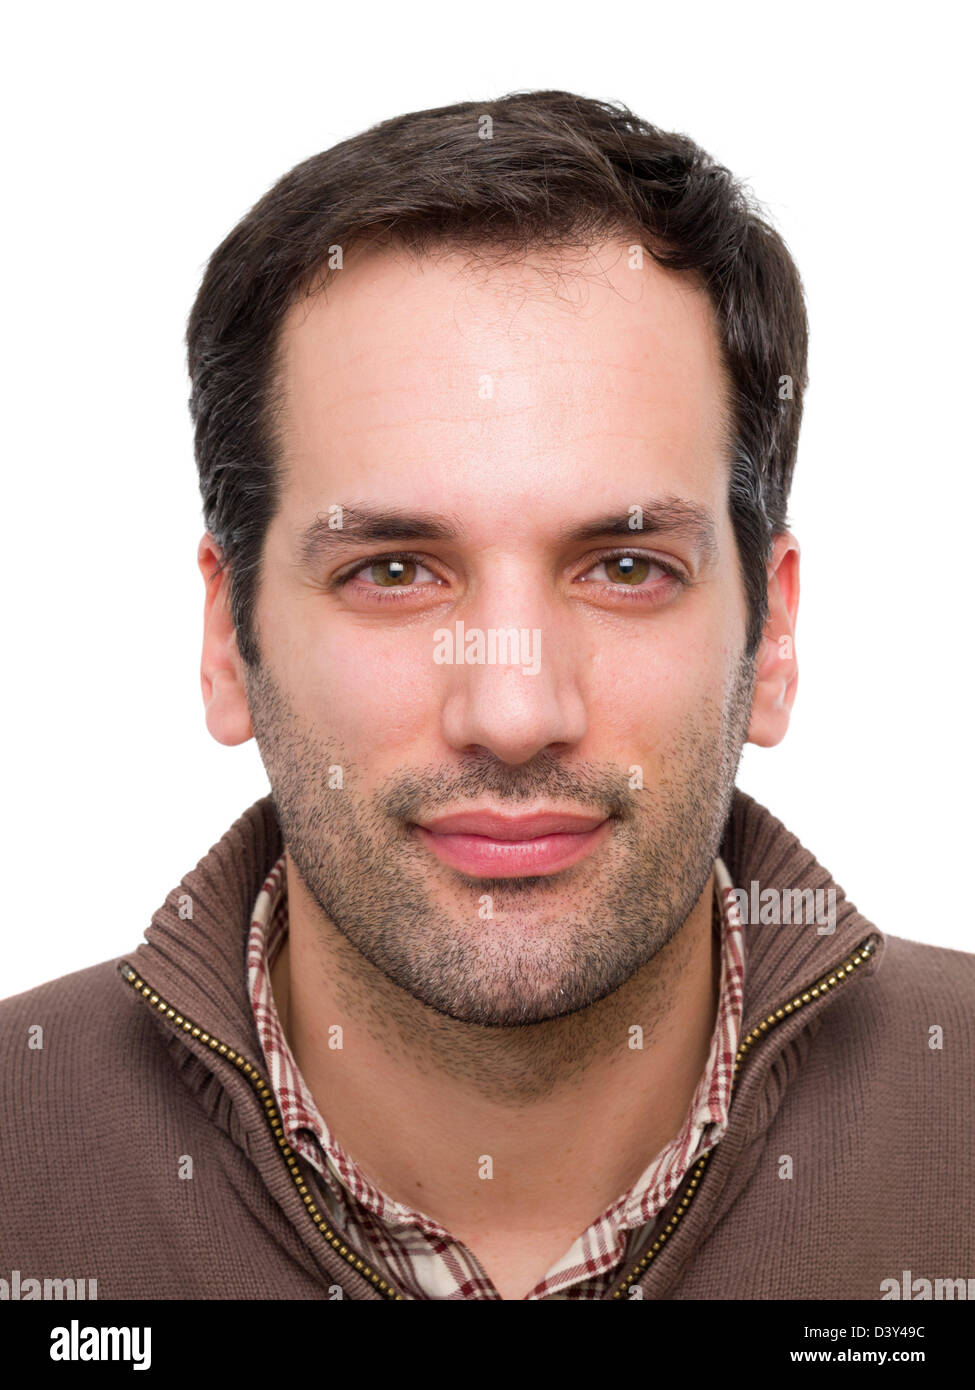 Headshot of a bearded young man Stock Photo